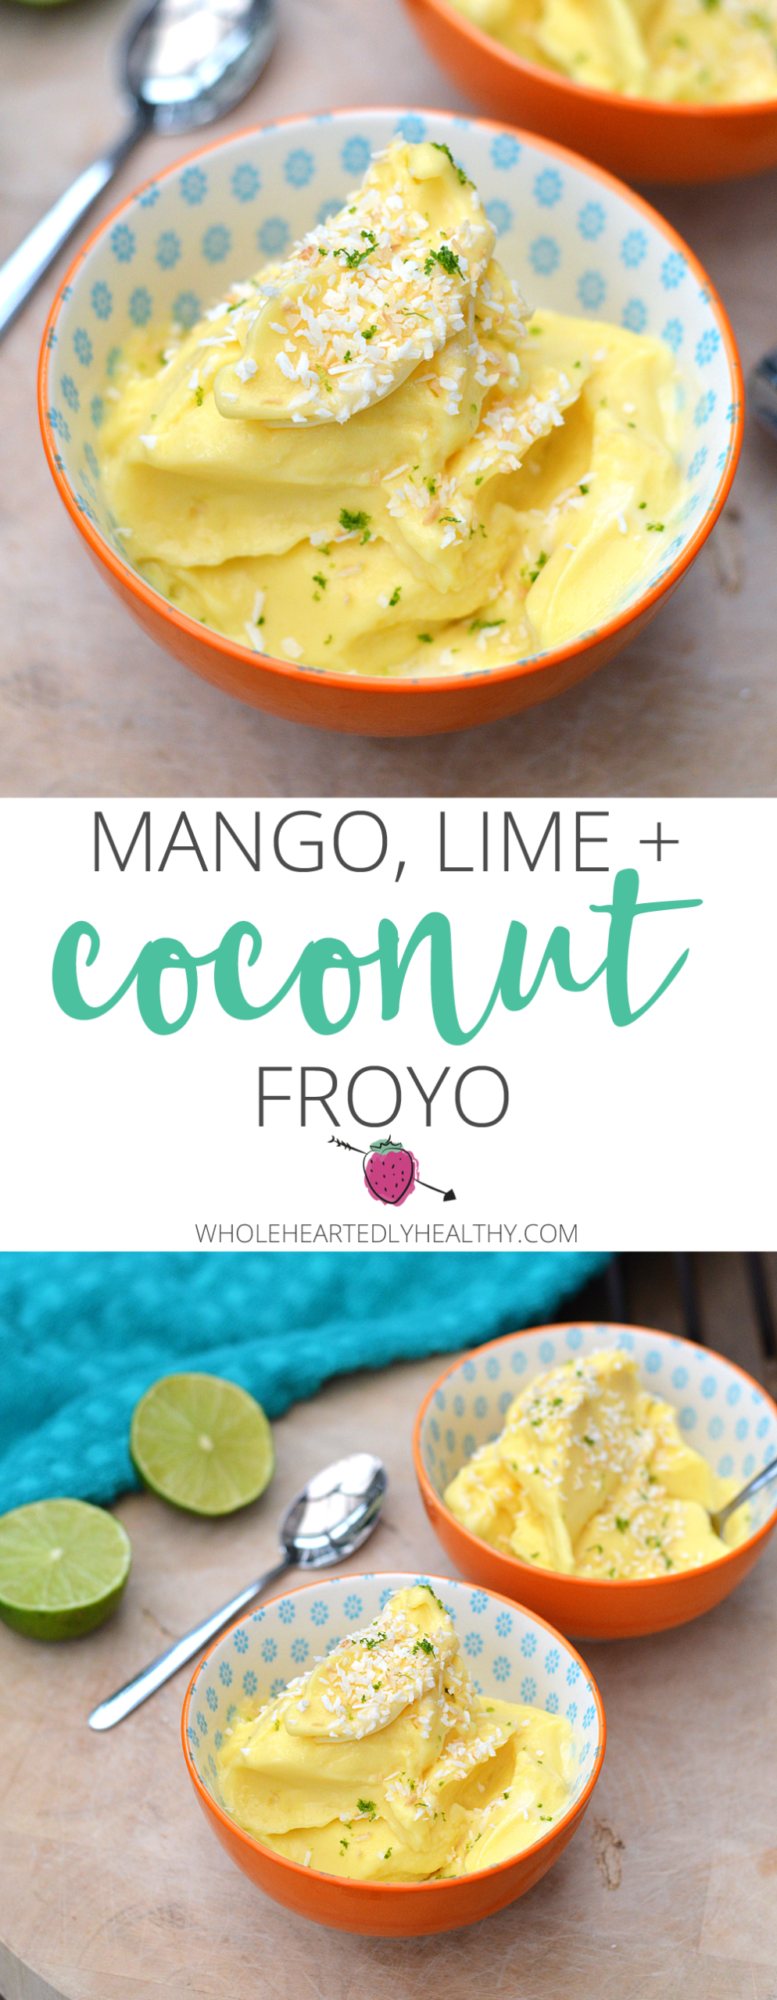 Mango lime and coconut froyo